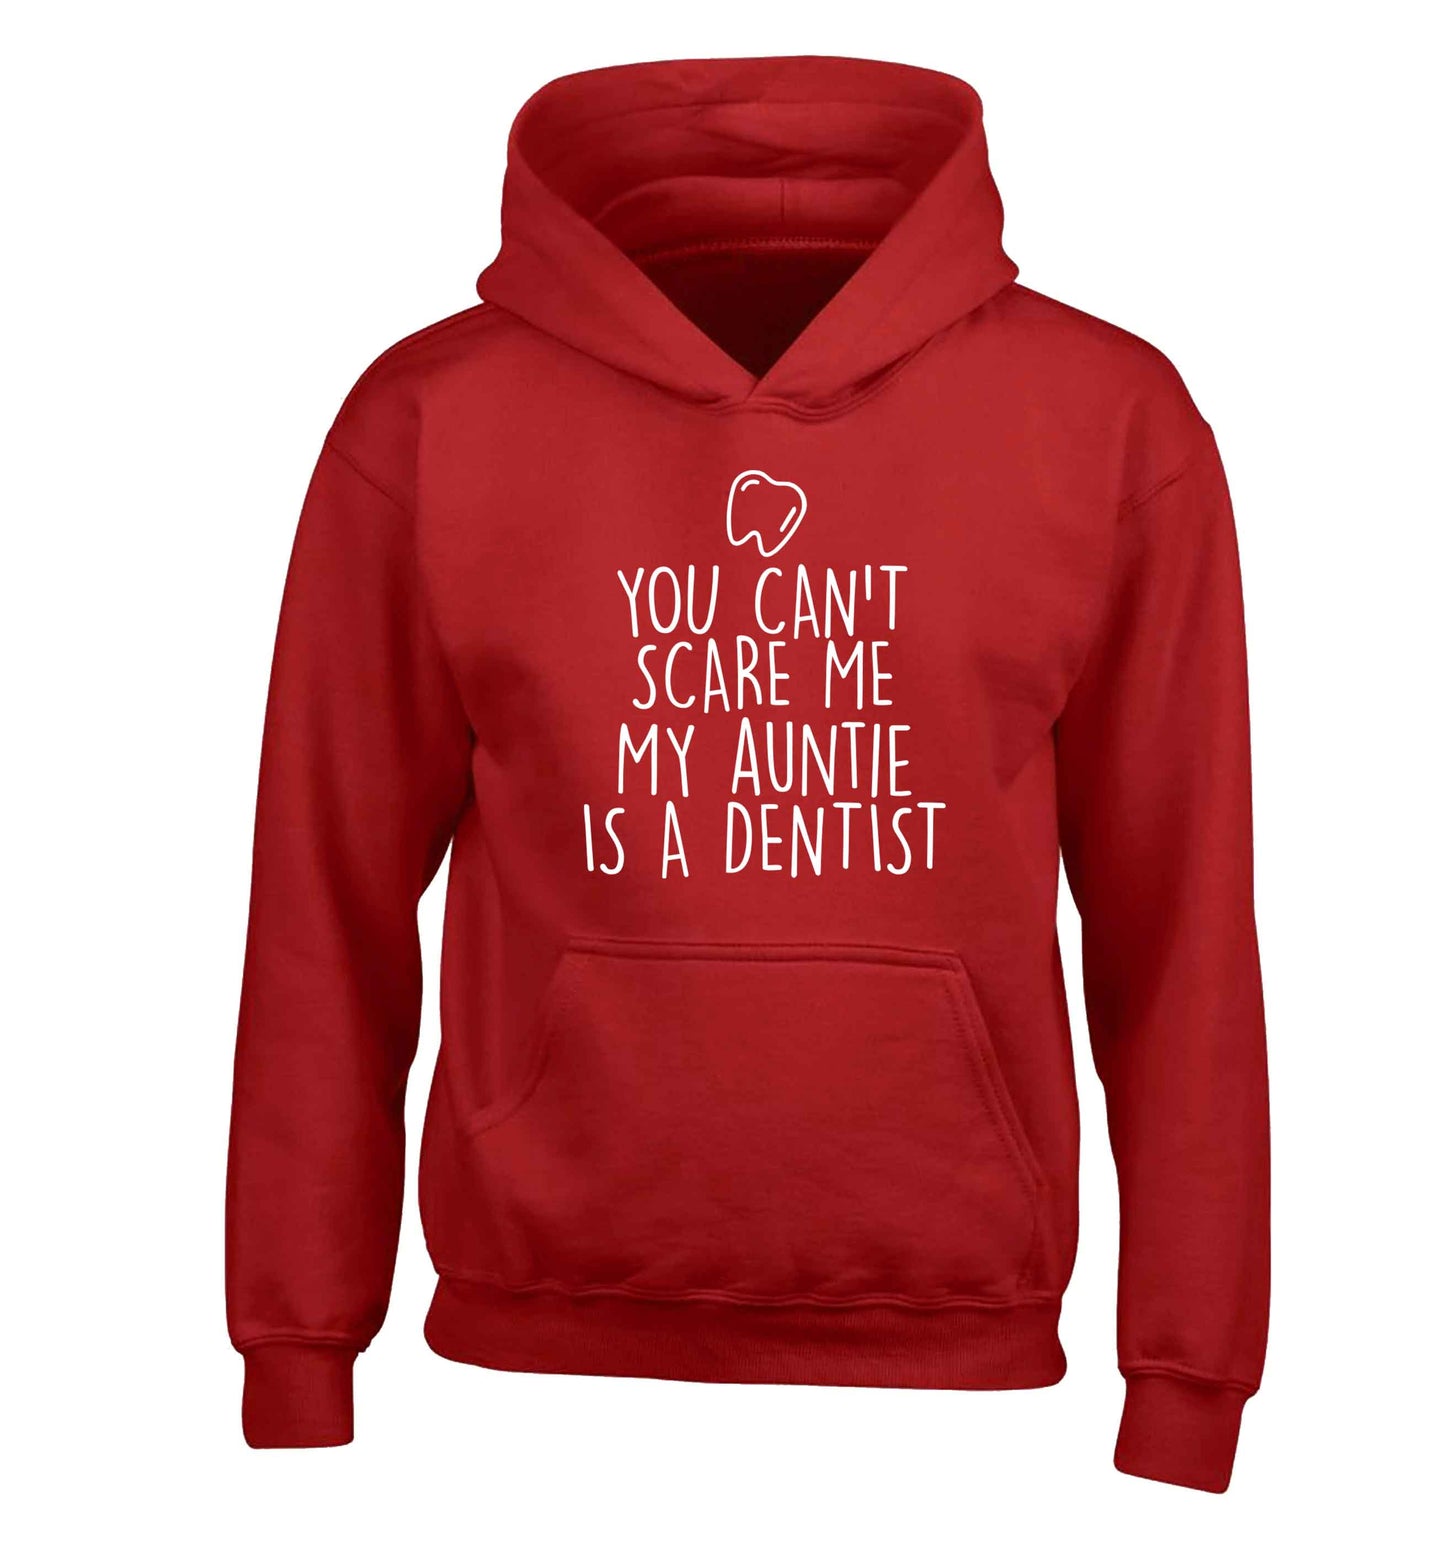 You can't scare me my auntie is a dentist children's red hoodie 12-13 Years